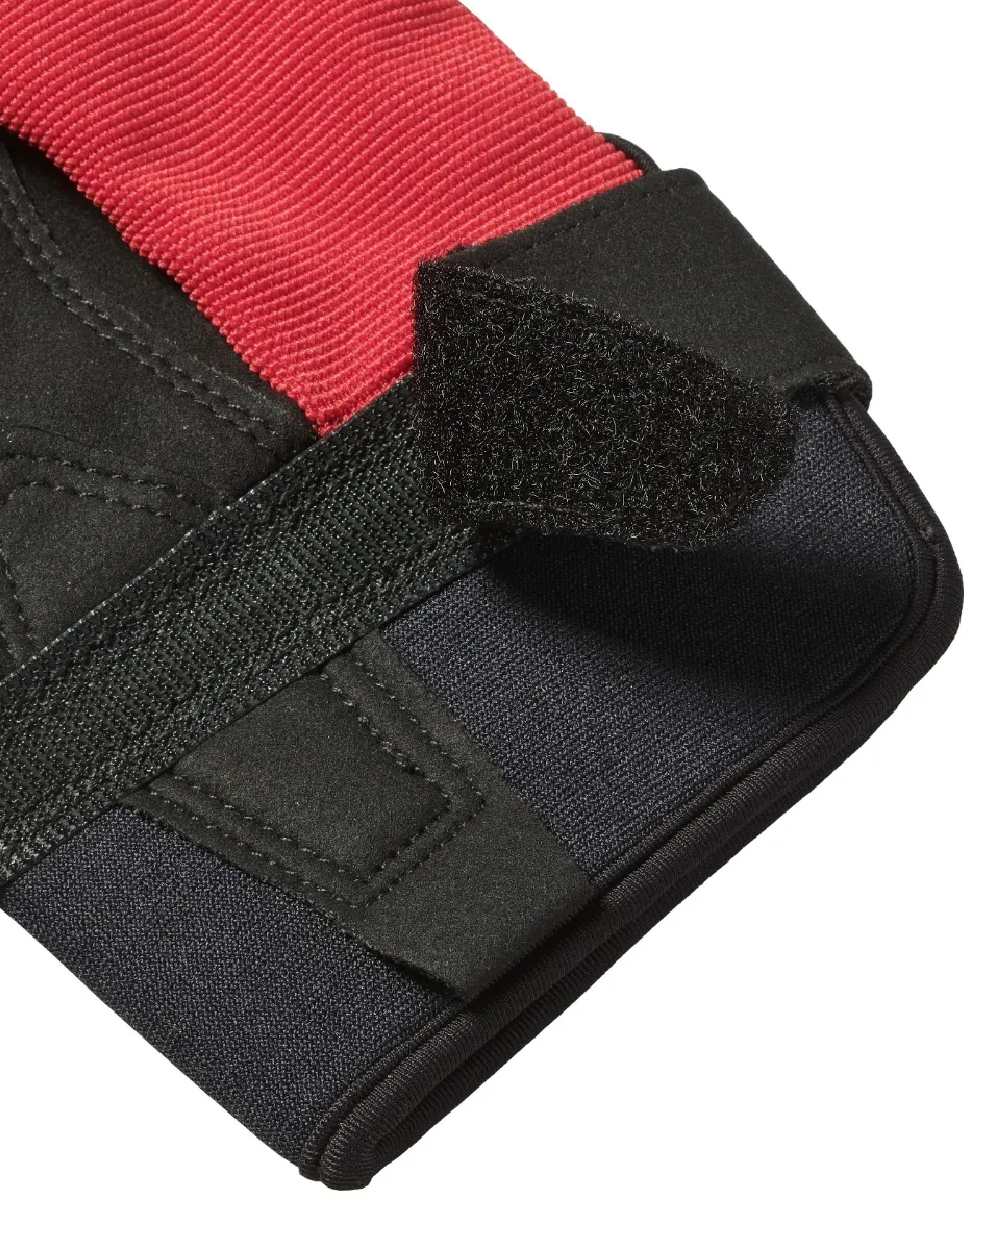 Musto Essential Sailing Long Finger Gloves in True Red 